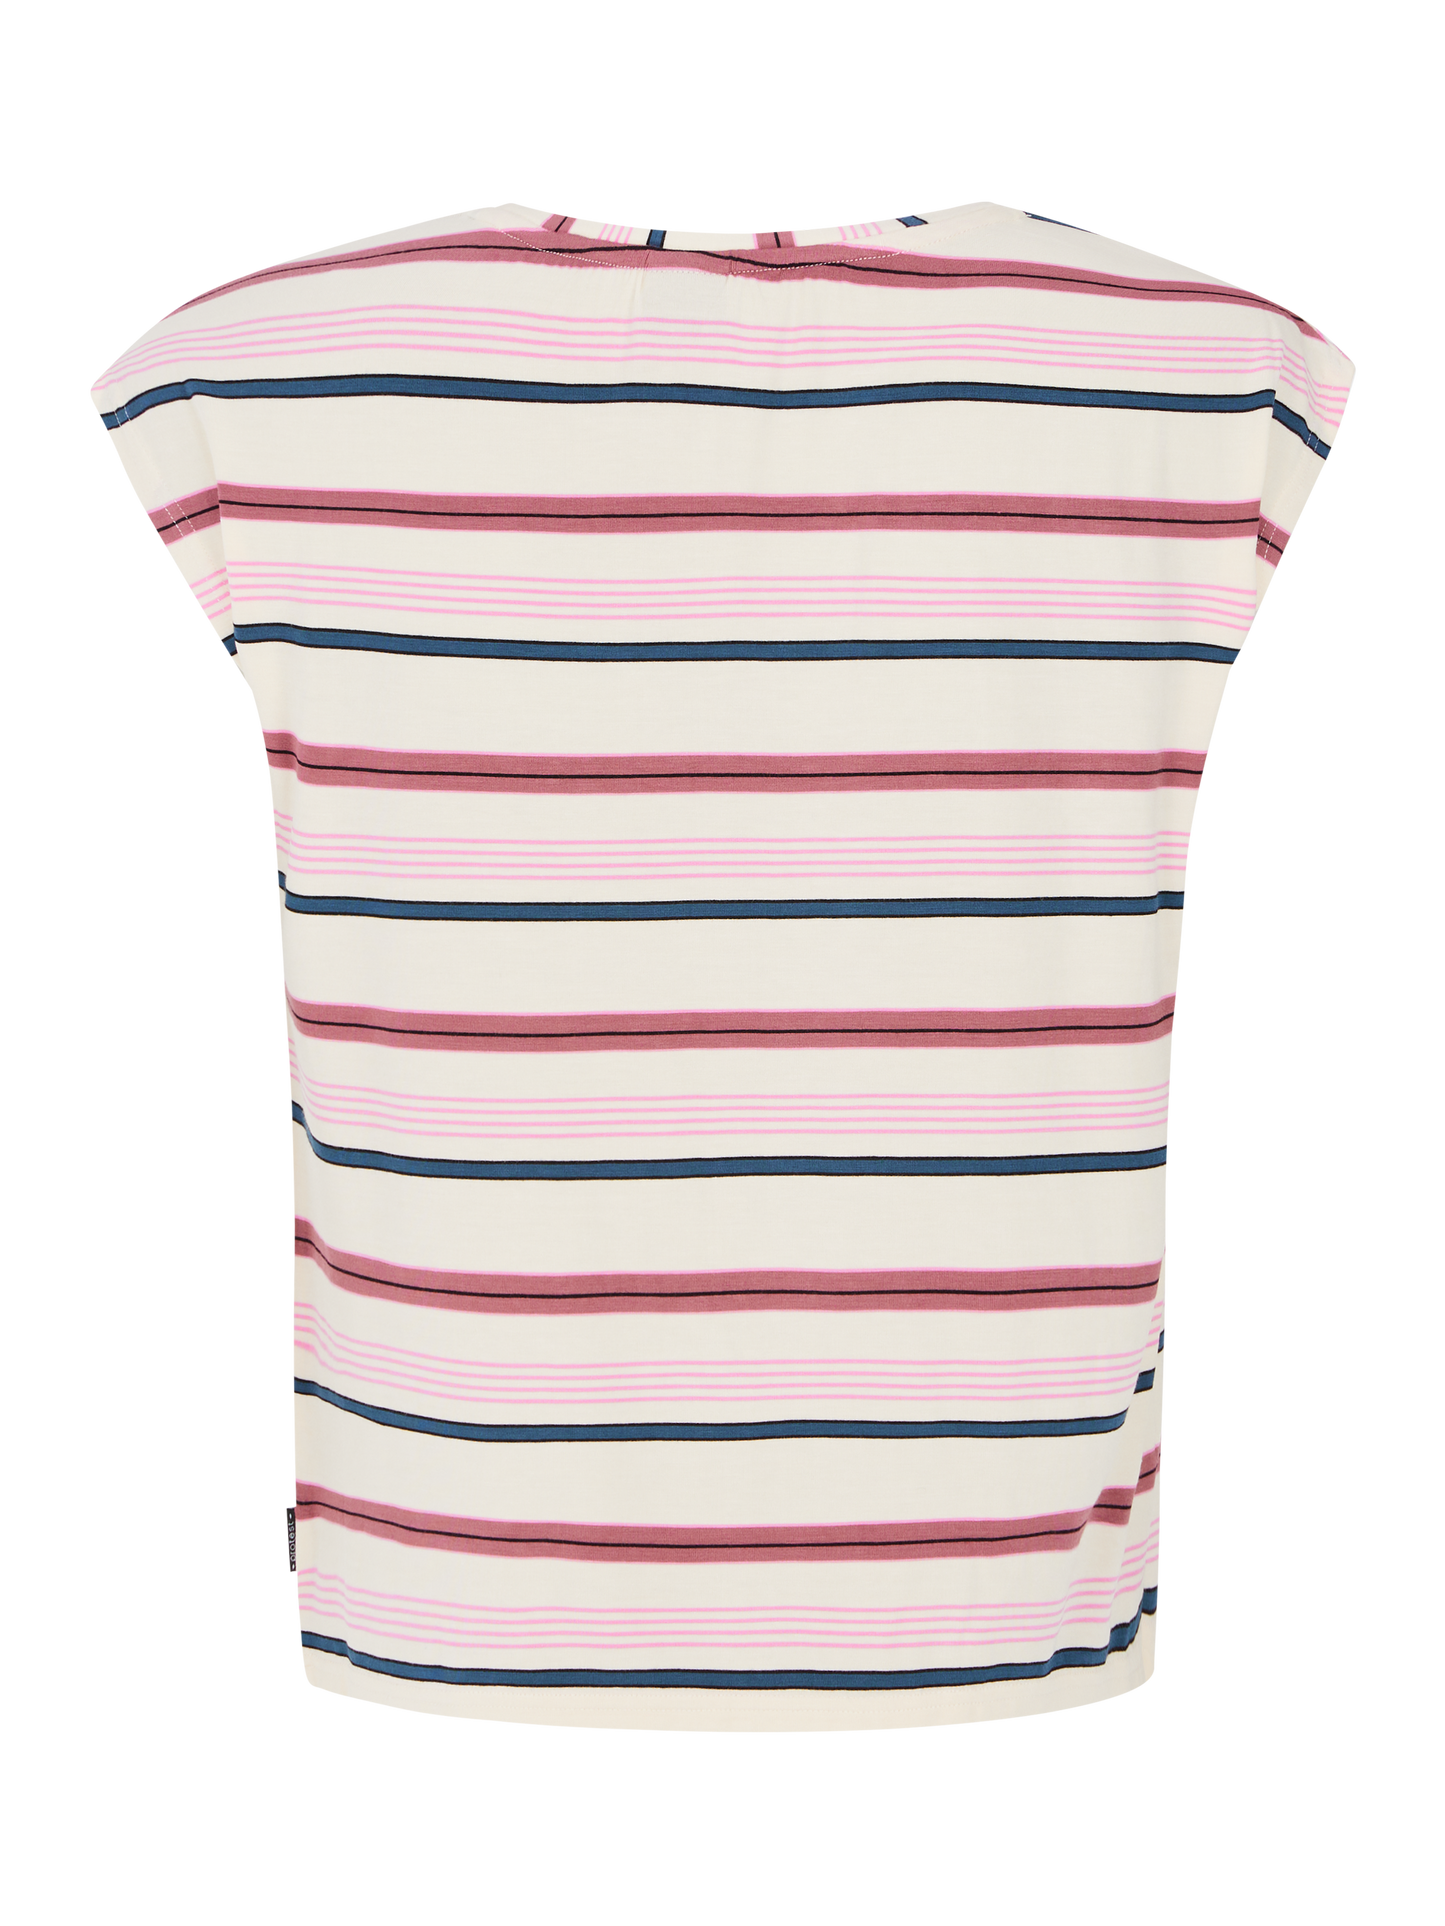 Protest Indy Striped T-Shirt in Deco Pink